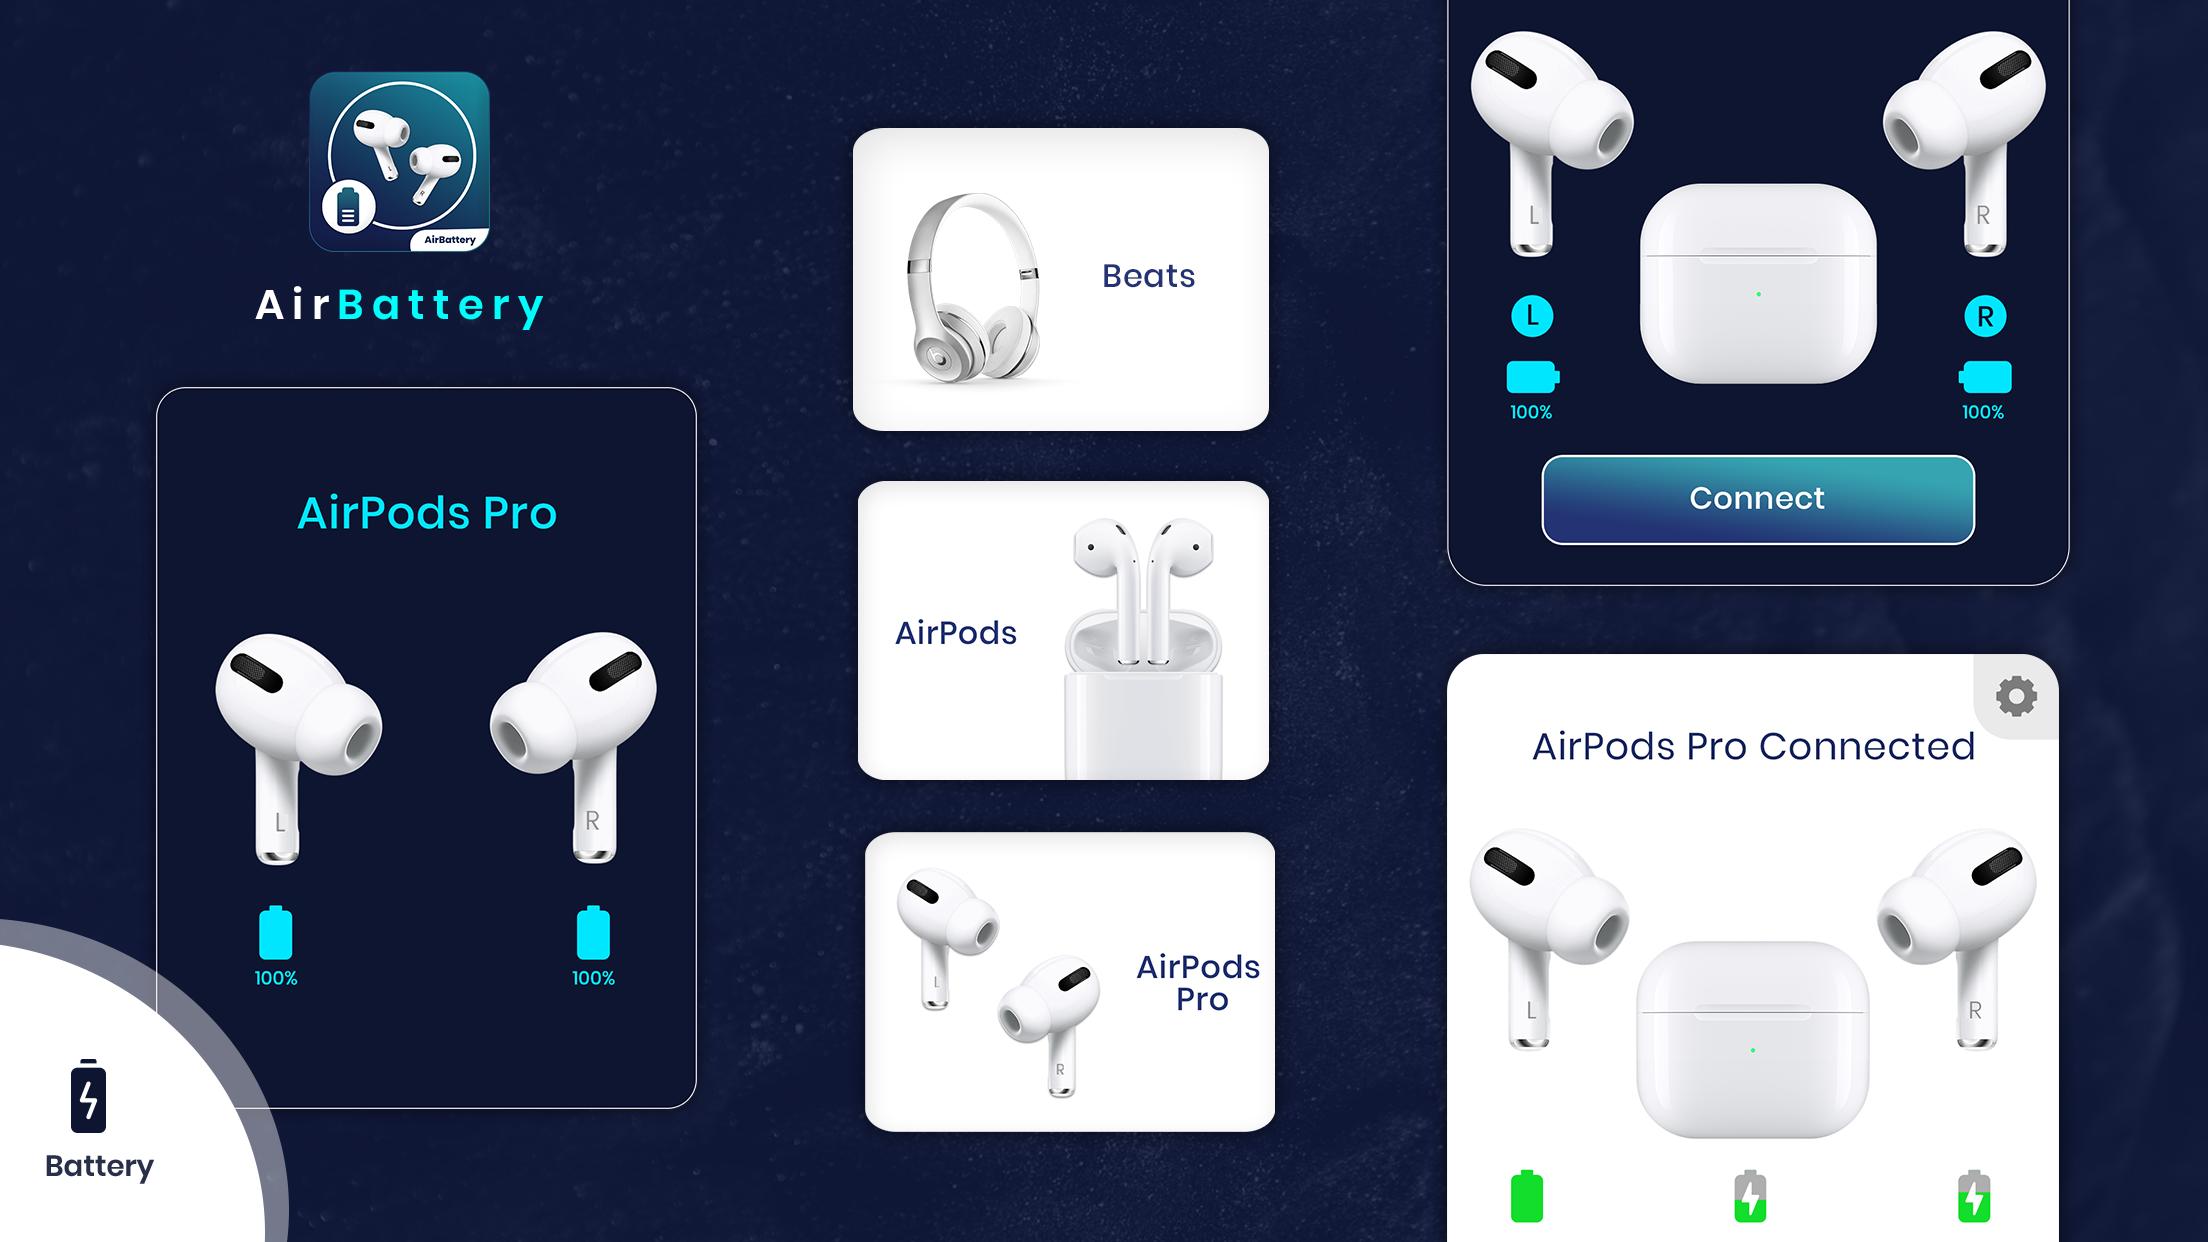 Battery pods. AIRPODS 1 схема. Pods Battery. Air Battery. Air Battery Pro.